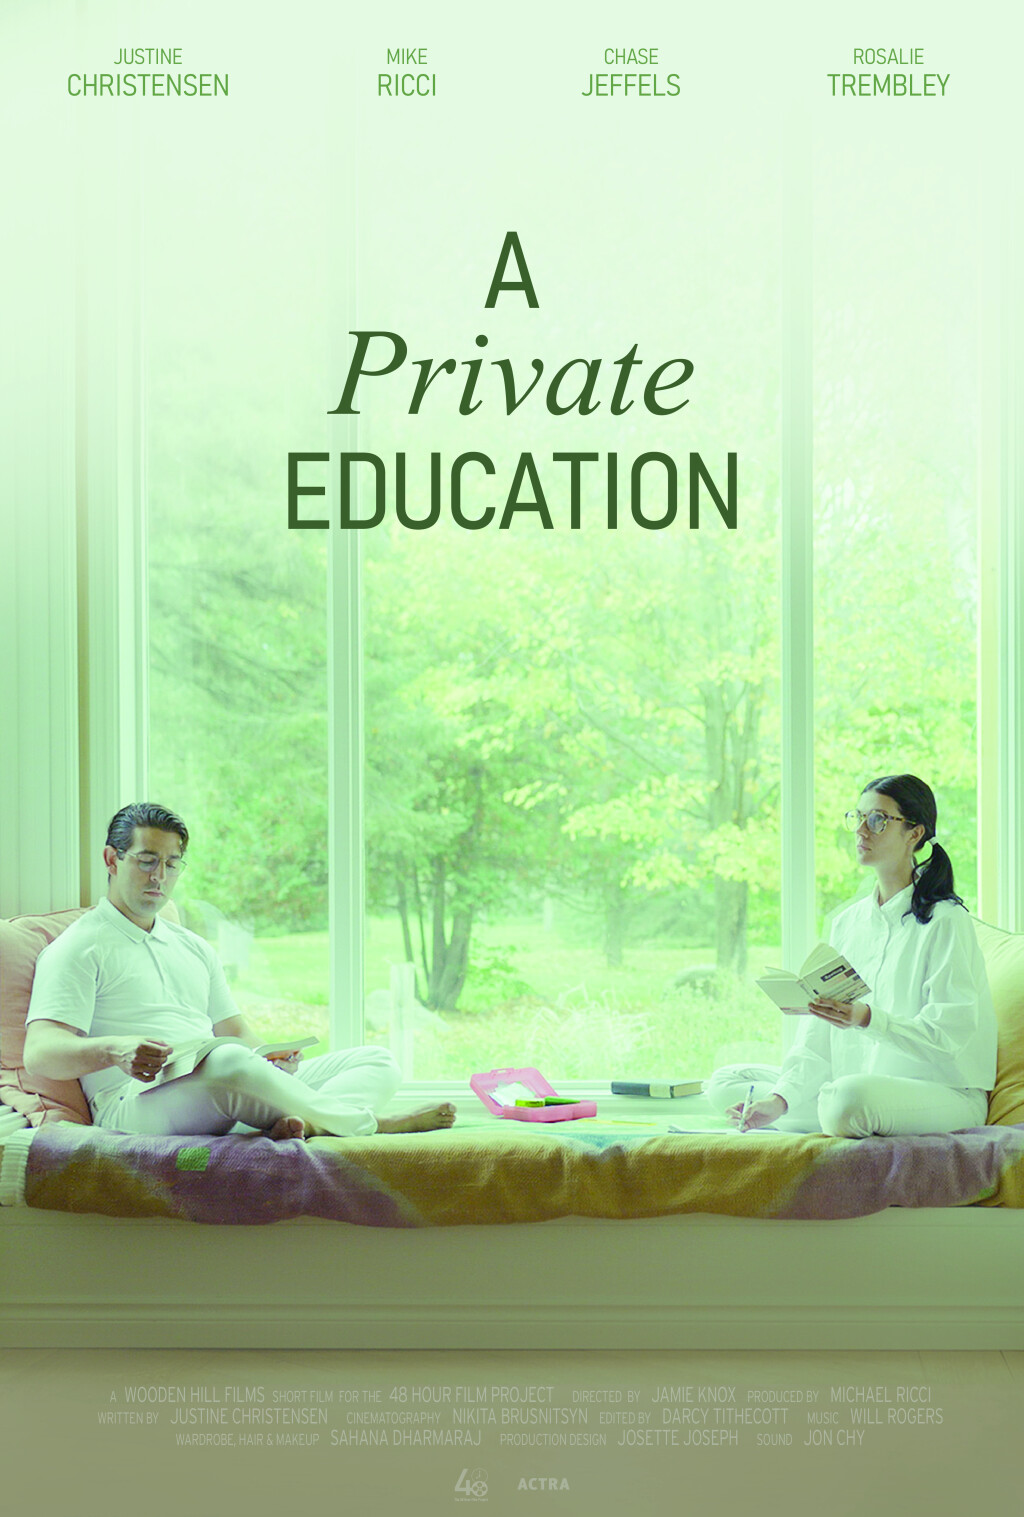 Filmposter for A Private Education 